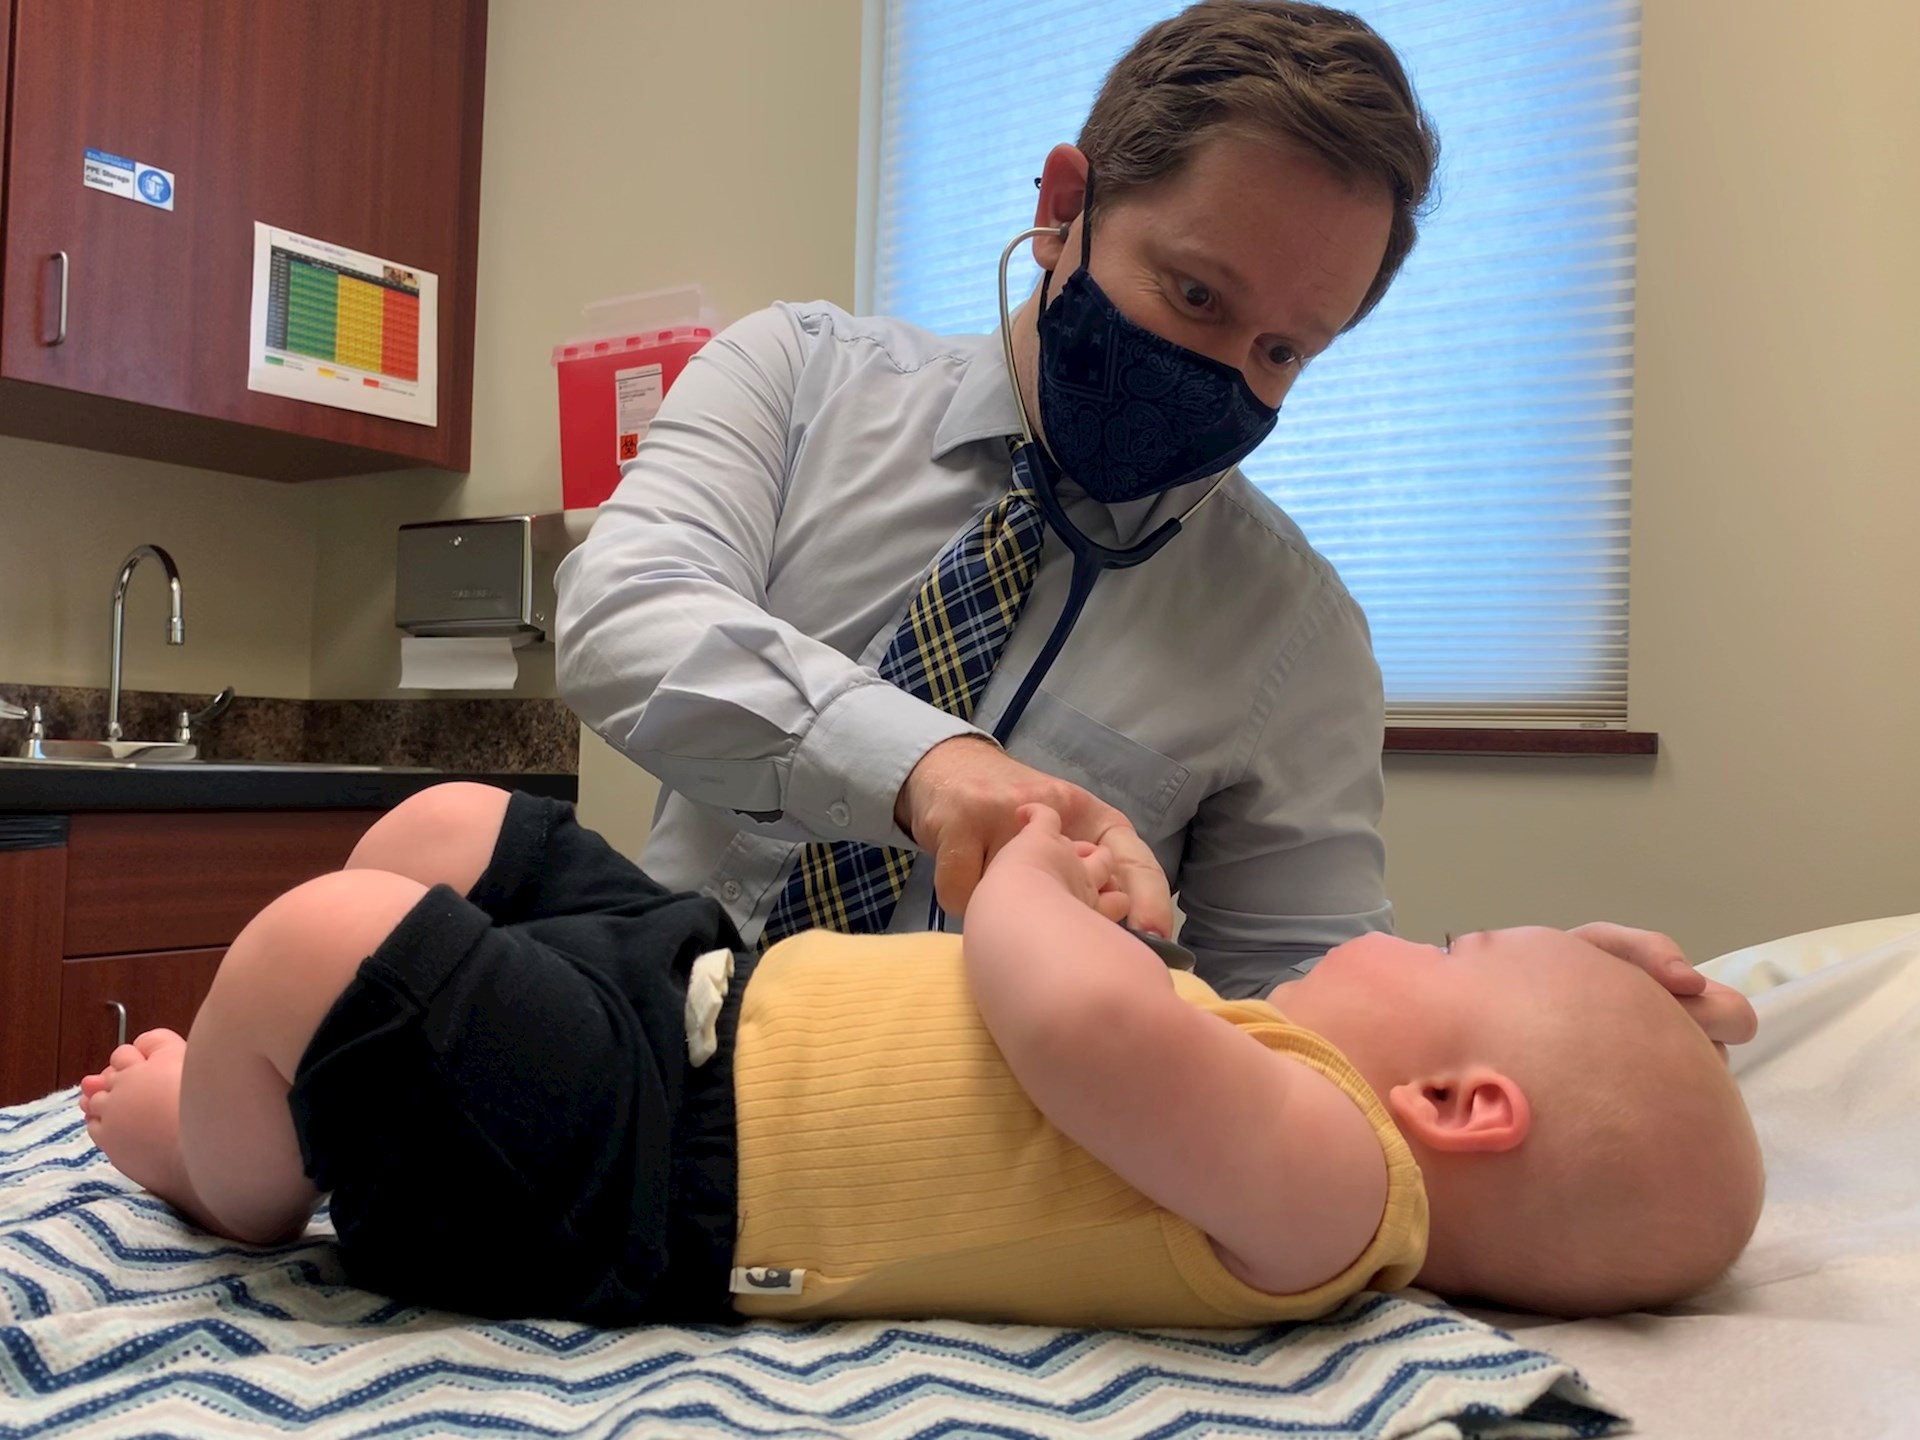 “I want to be able to take care of patients no matter how old they might be, in any situation possible,” said Dr. Schmutzler. “I think it’s going to be a good asset to the community, to have someone trained specifically in pediatrics.”